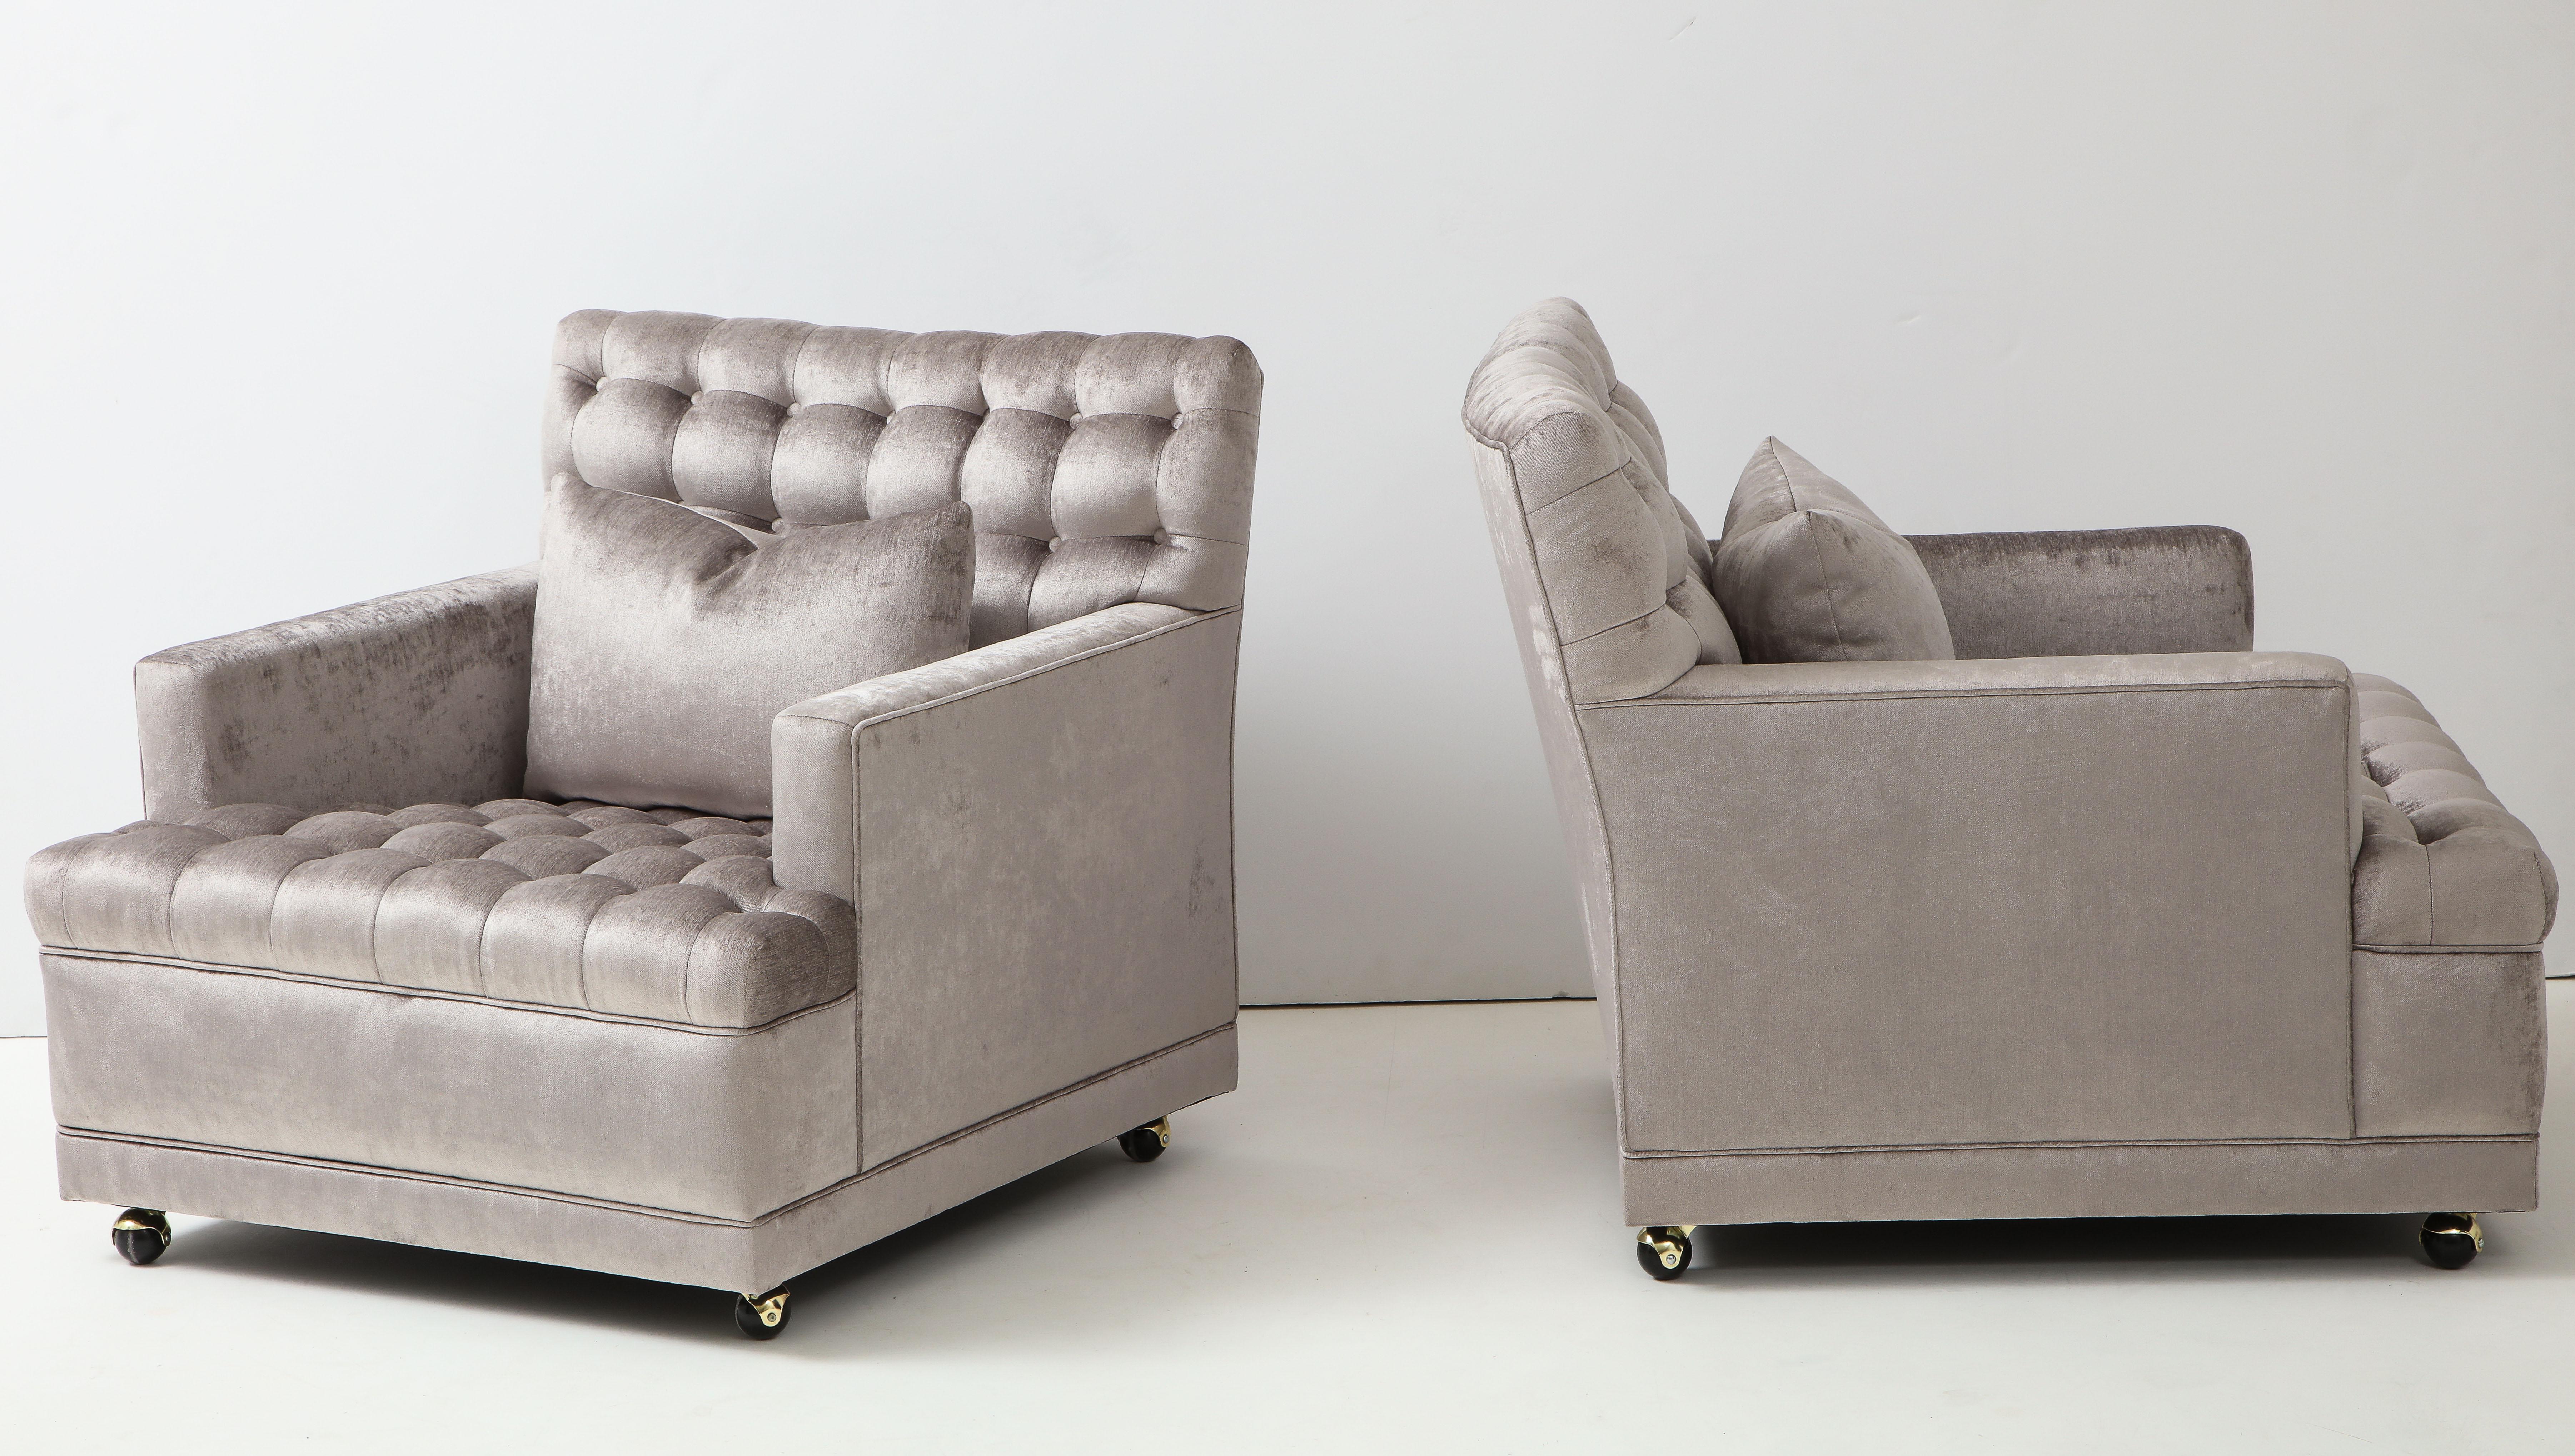 Mid-20th Century Pair of Biscuit Tufted Club Chairs.